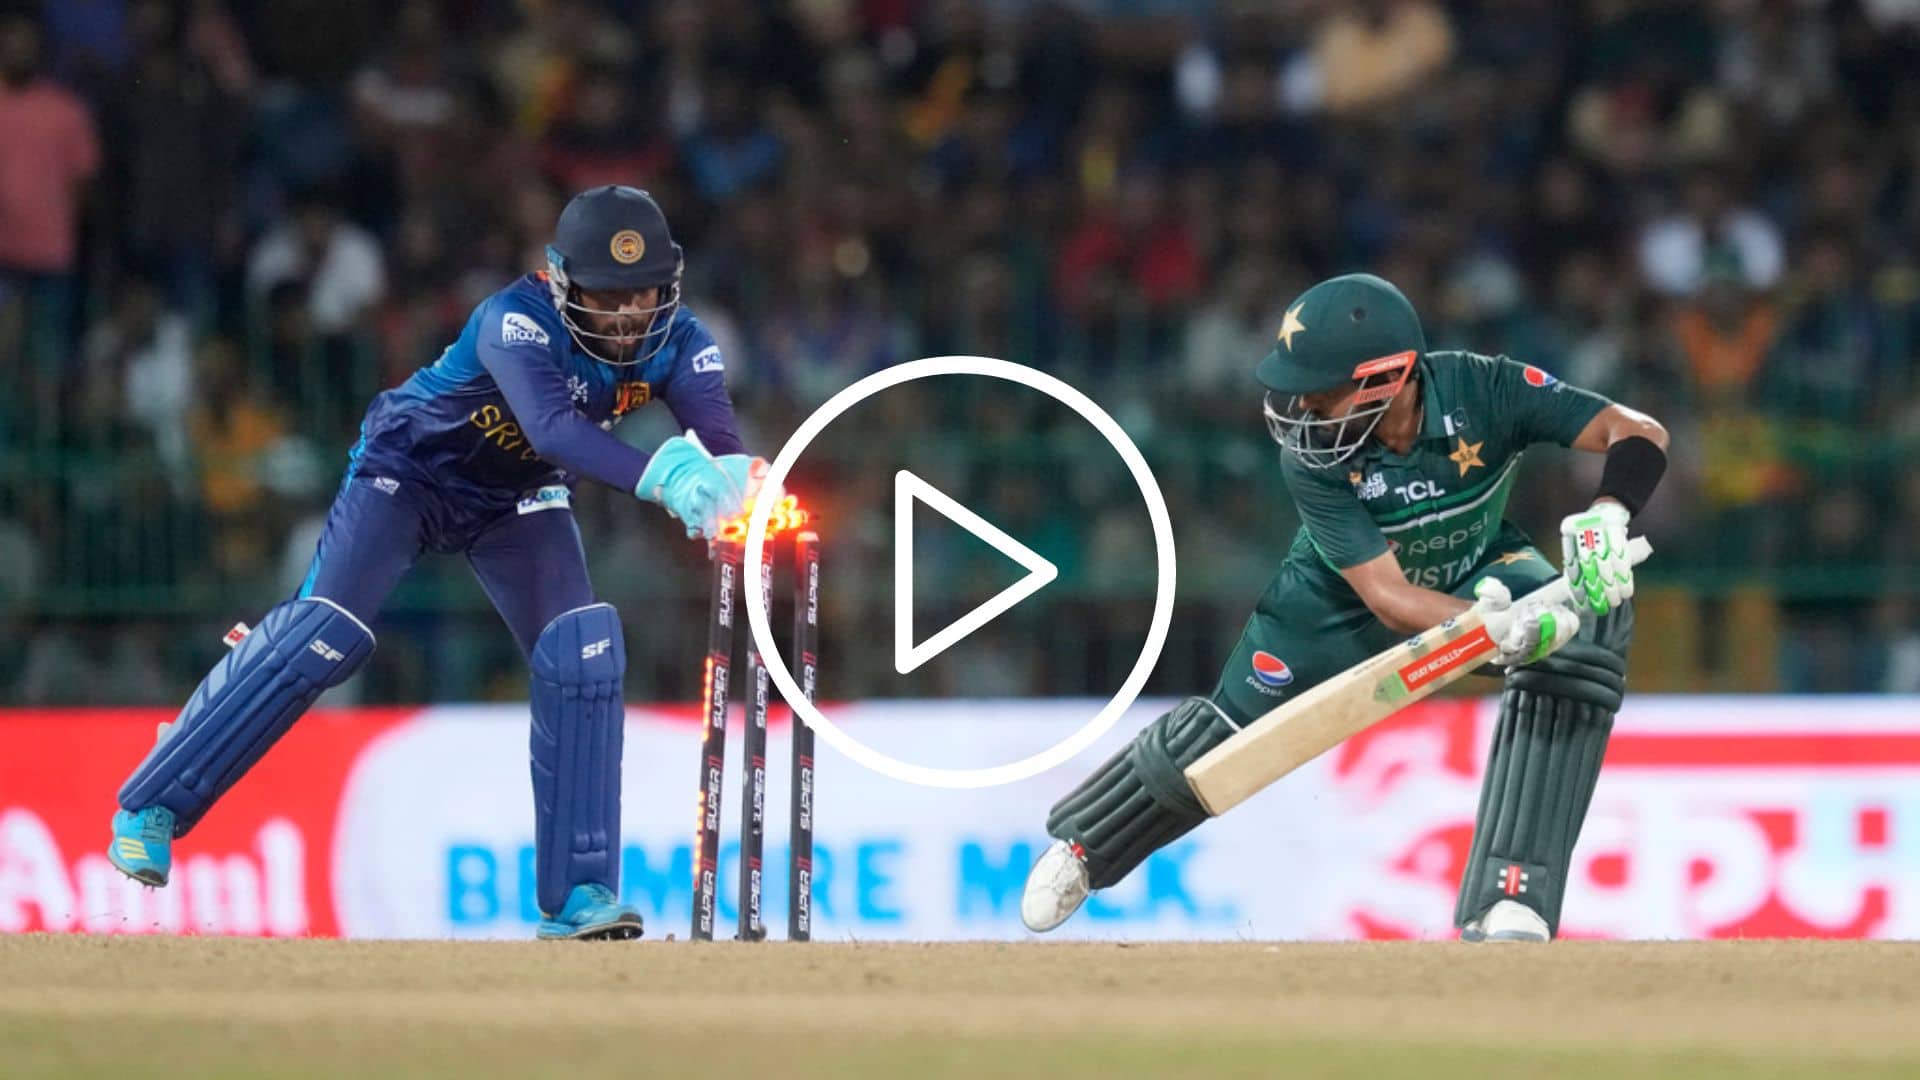 [Watch] Babar Azam Gets Stumped Off Dunith Wellalage as Kusal Mendis Does a MS Dhoni